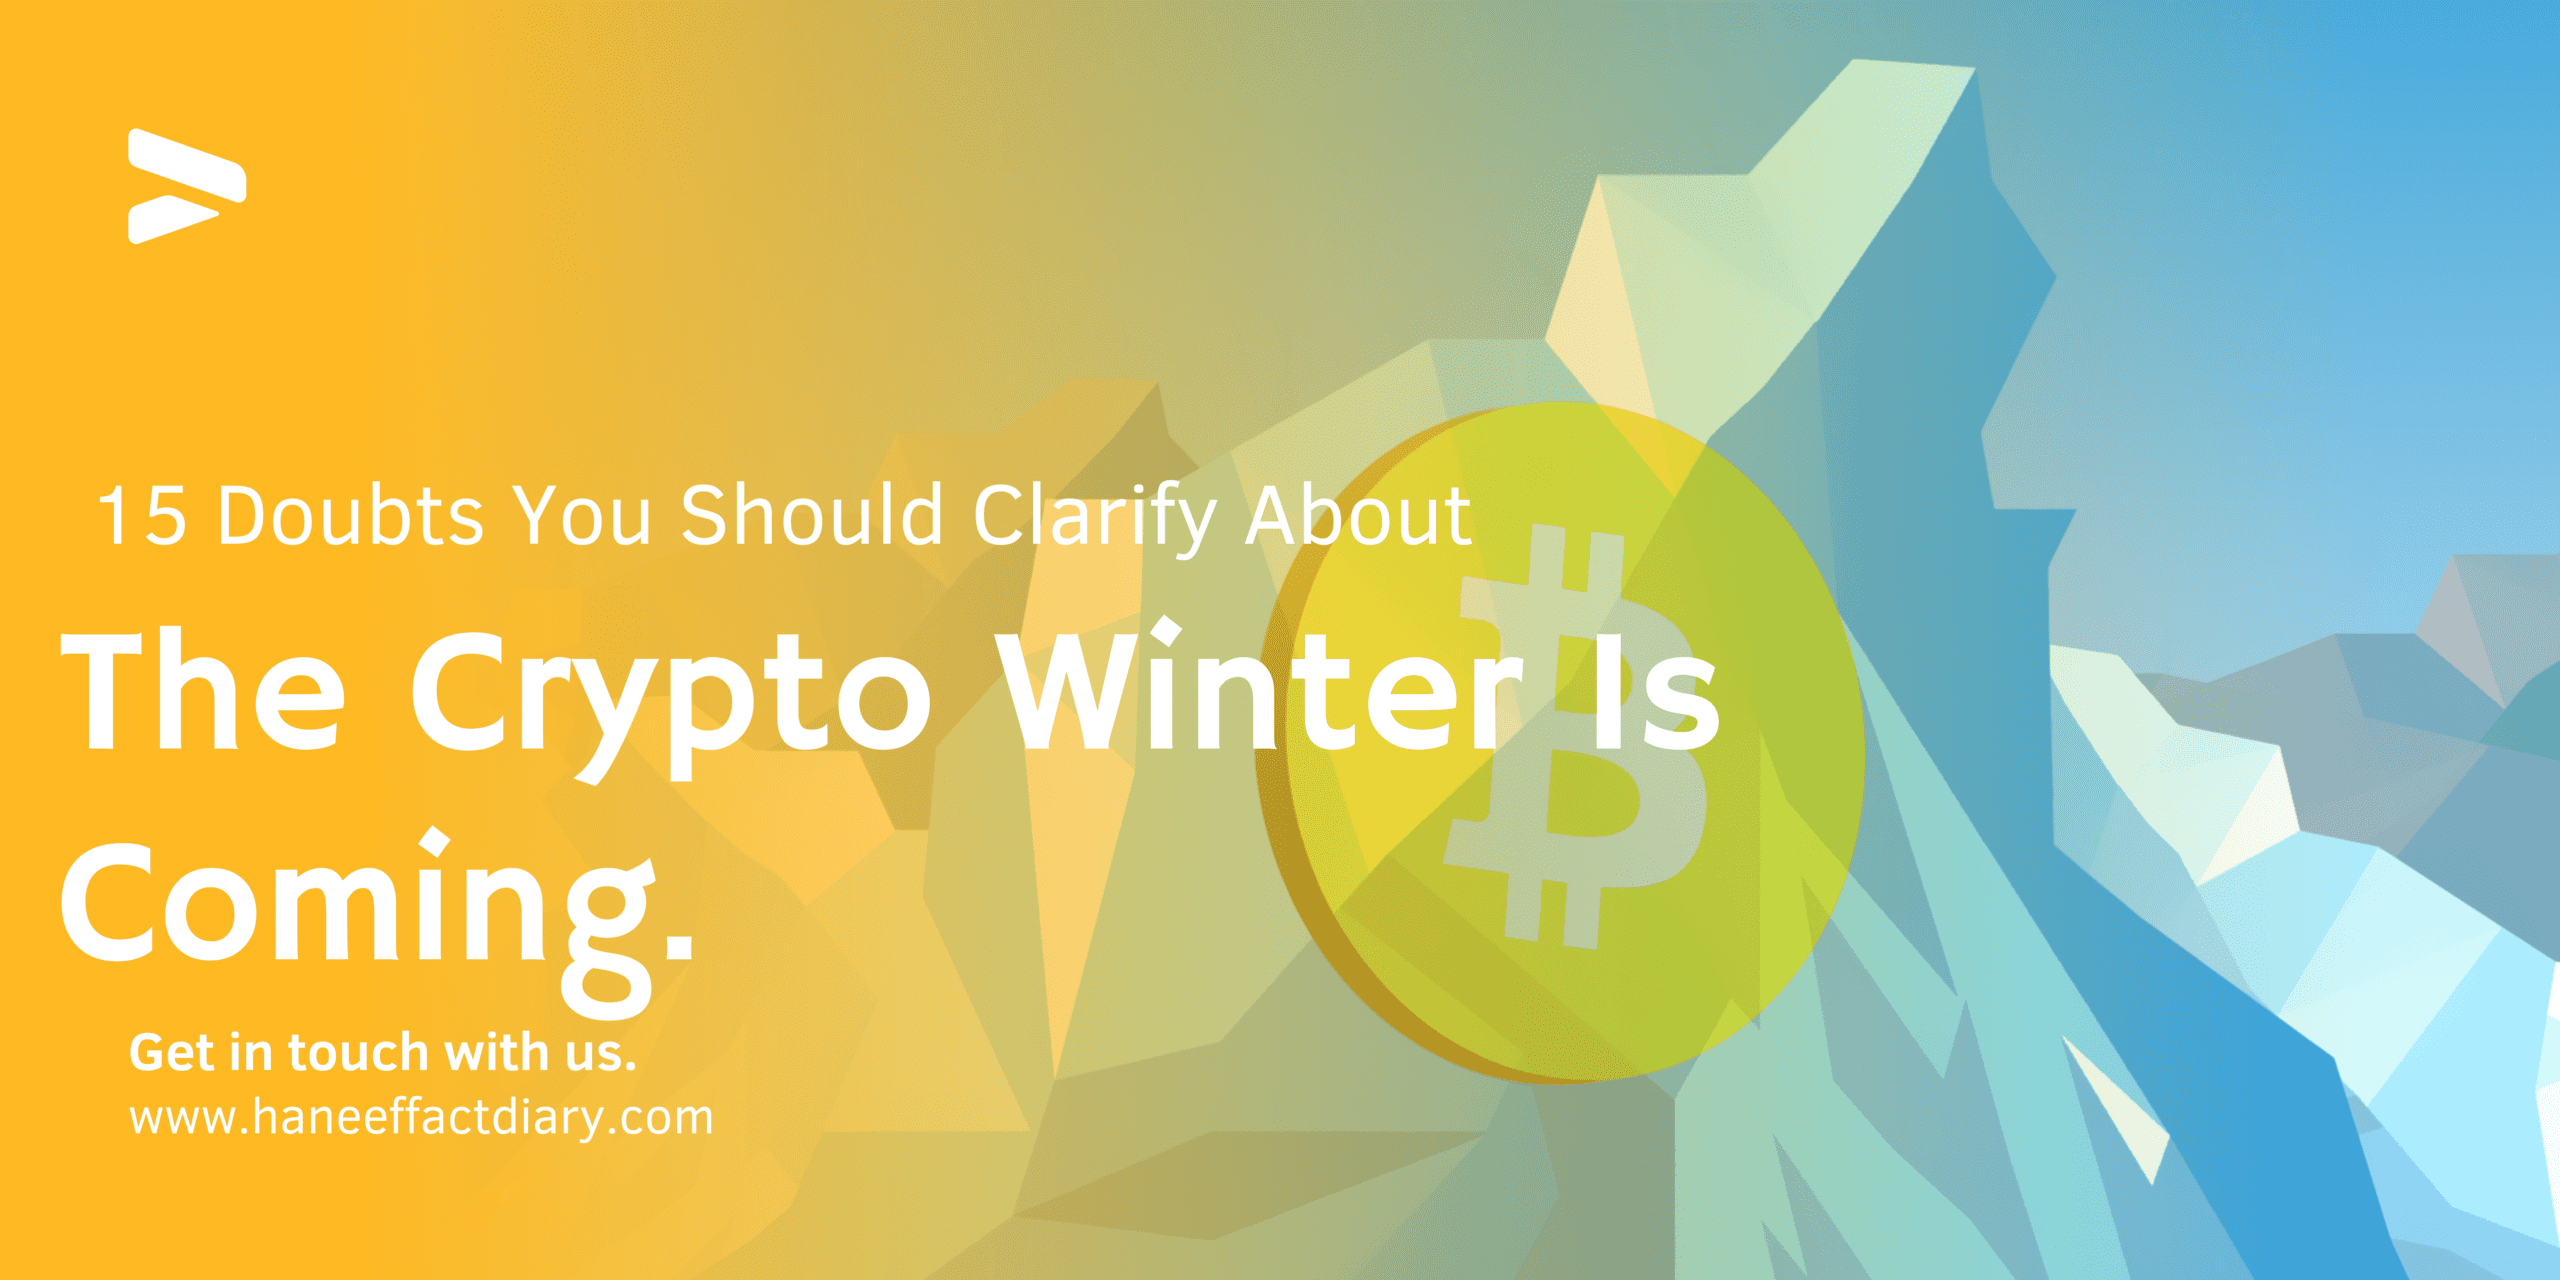 15 Doubts You Should Clarify About The Crypto Winter Is Coming.